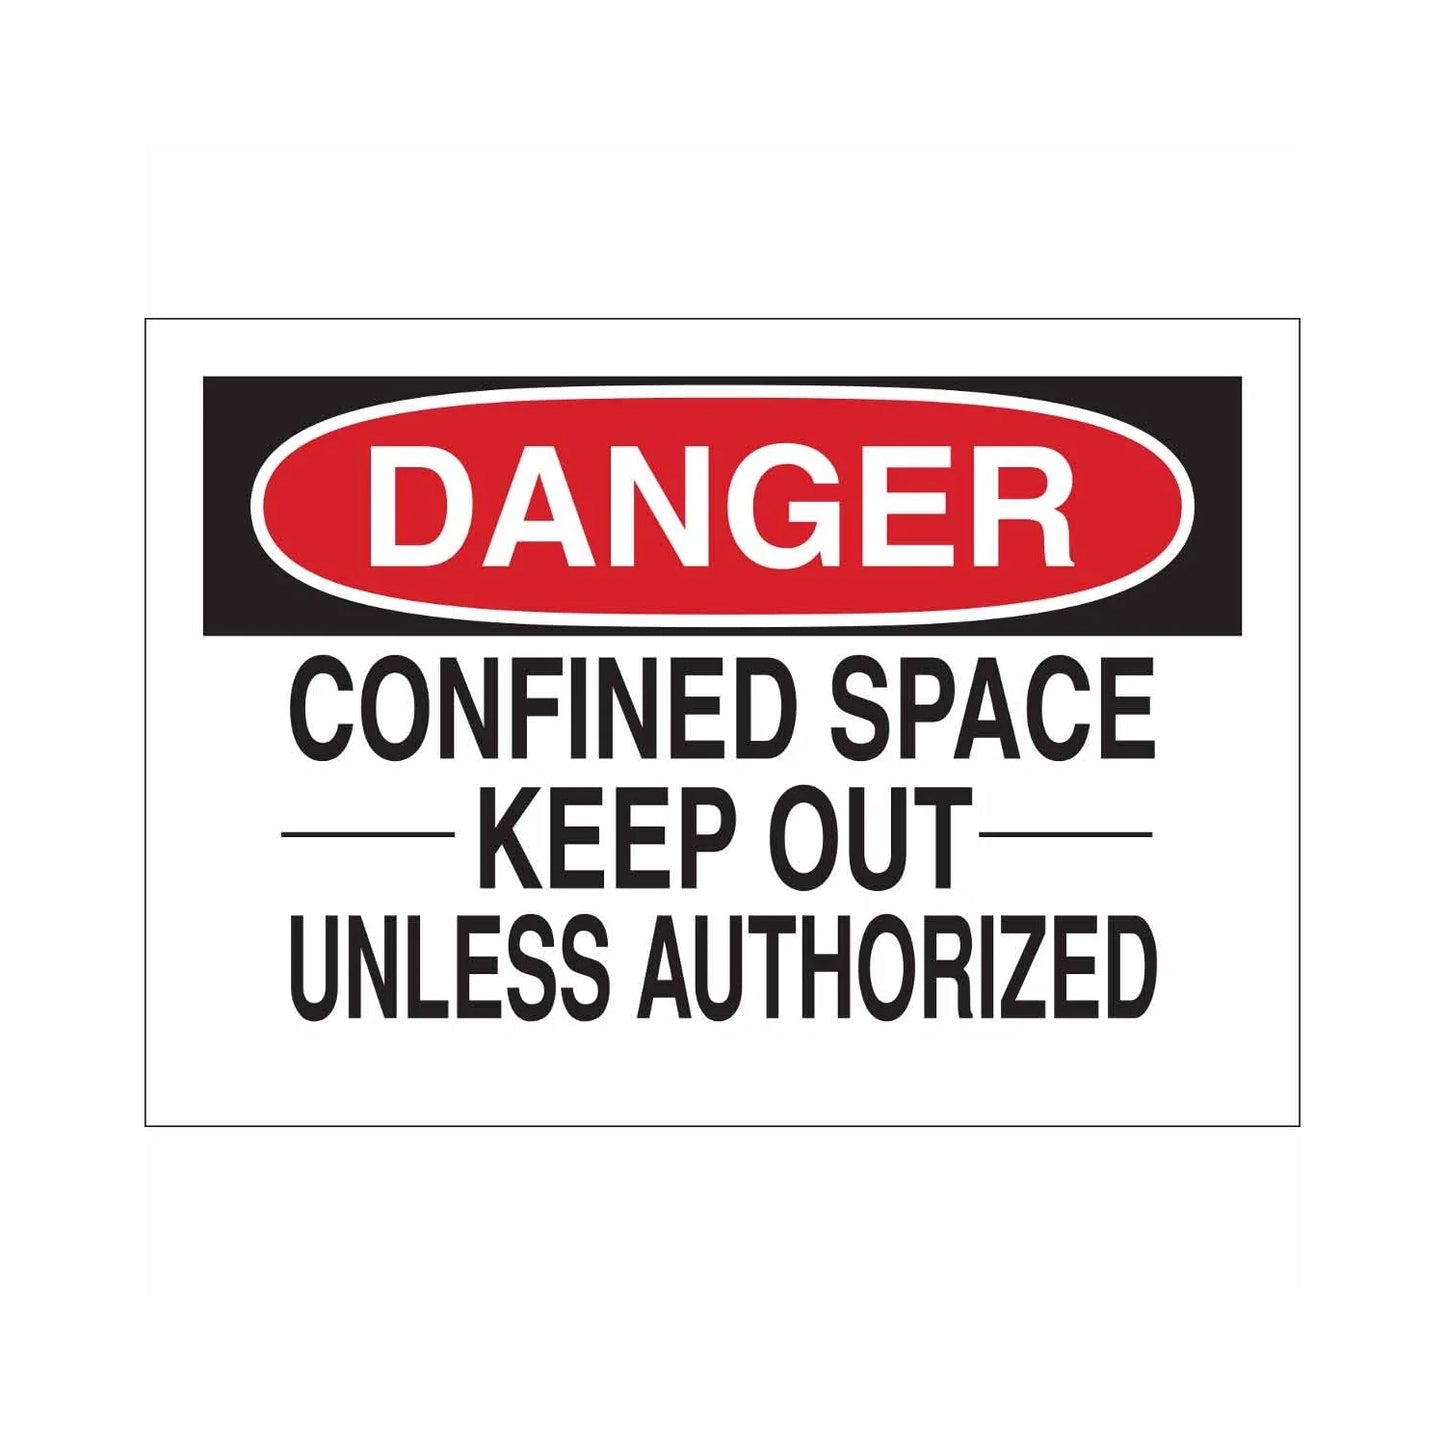 DANGER Confined Space Keep Out Unless Authorized Sign